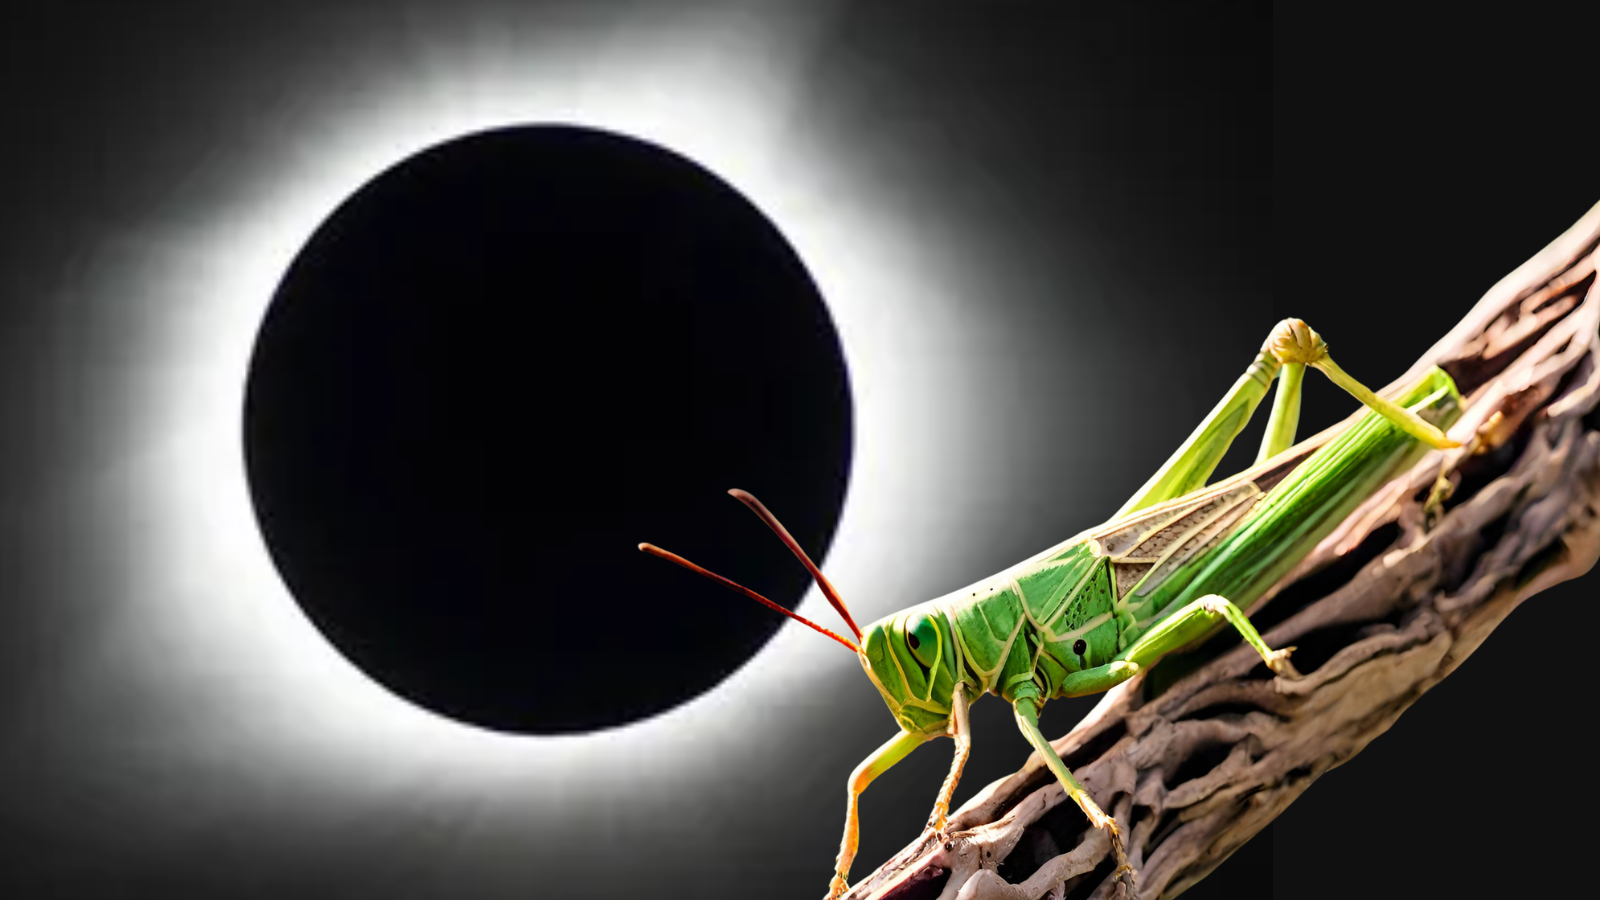 NASA Eclipse Soundscapes Project will record how 2024’s total solar eclipse impacts nature Space